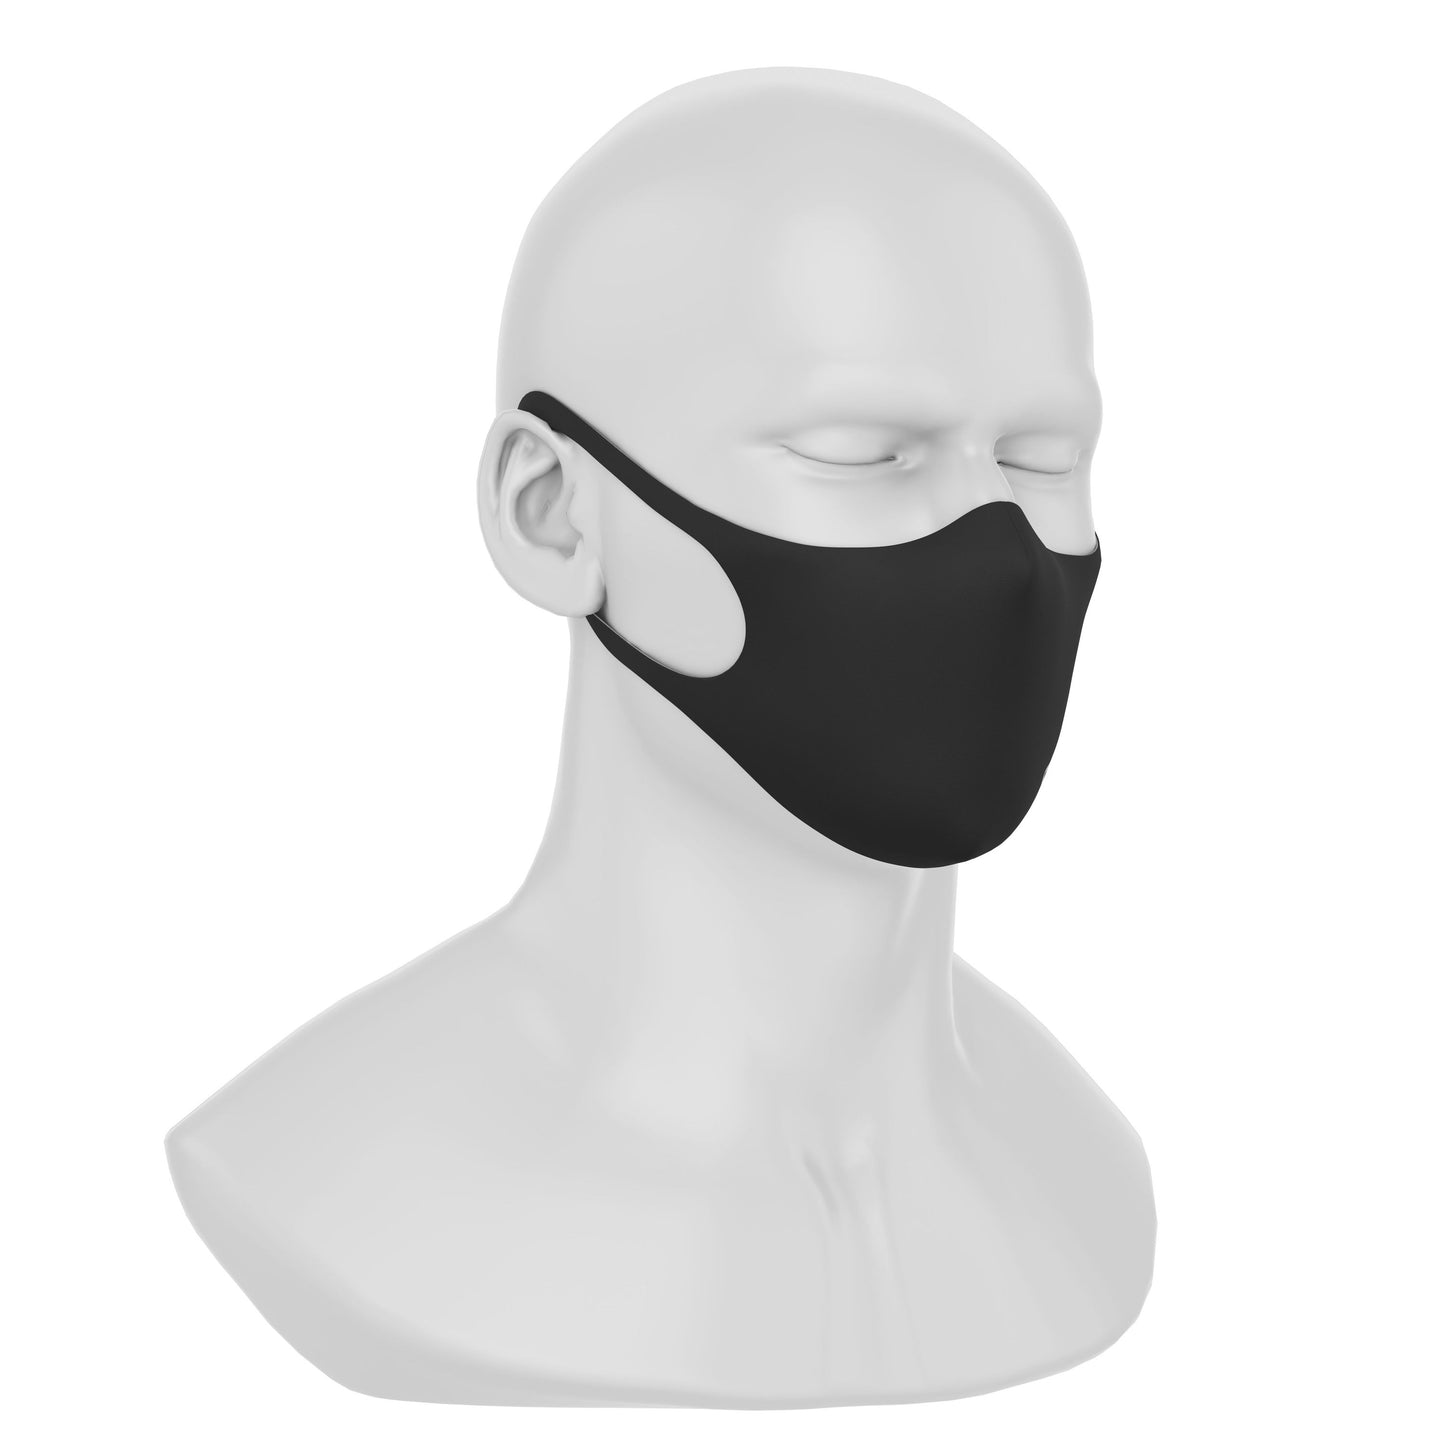 Picture of a Black Face Mask side view